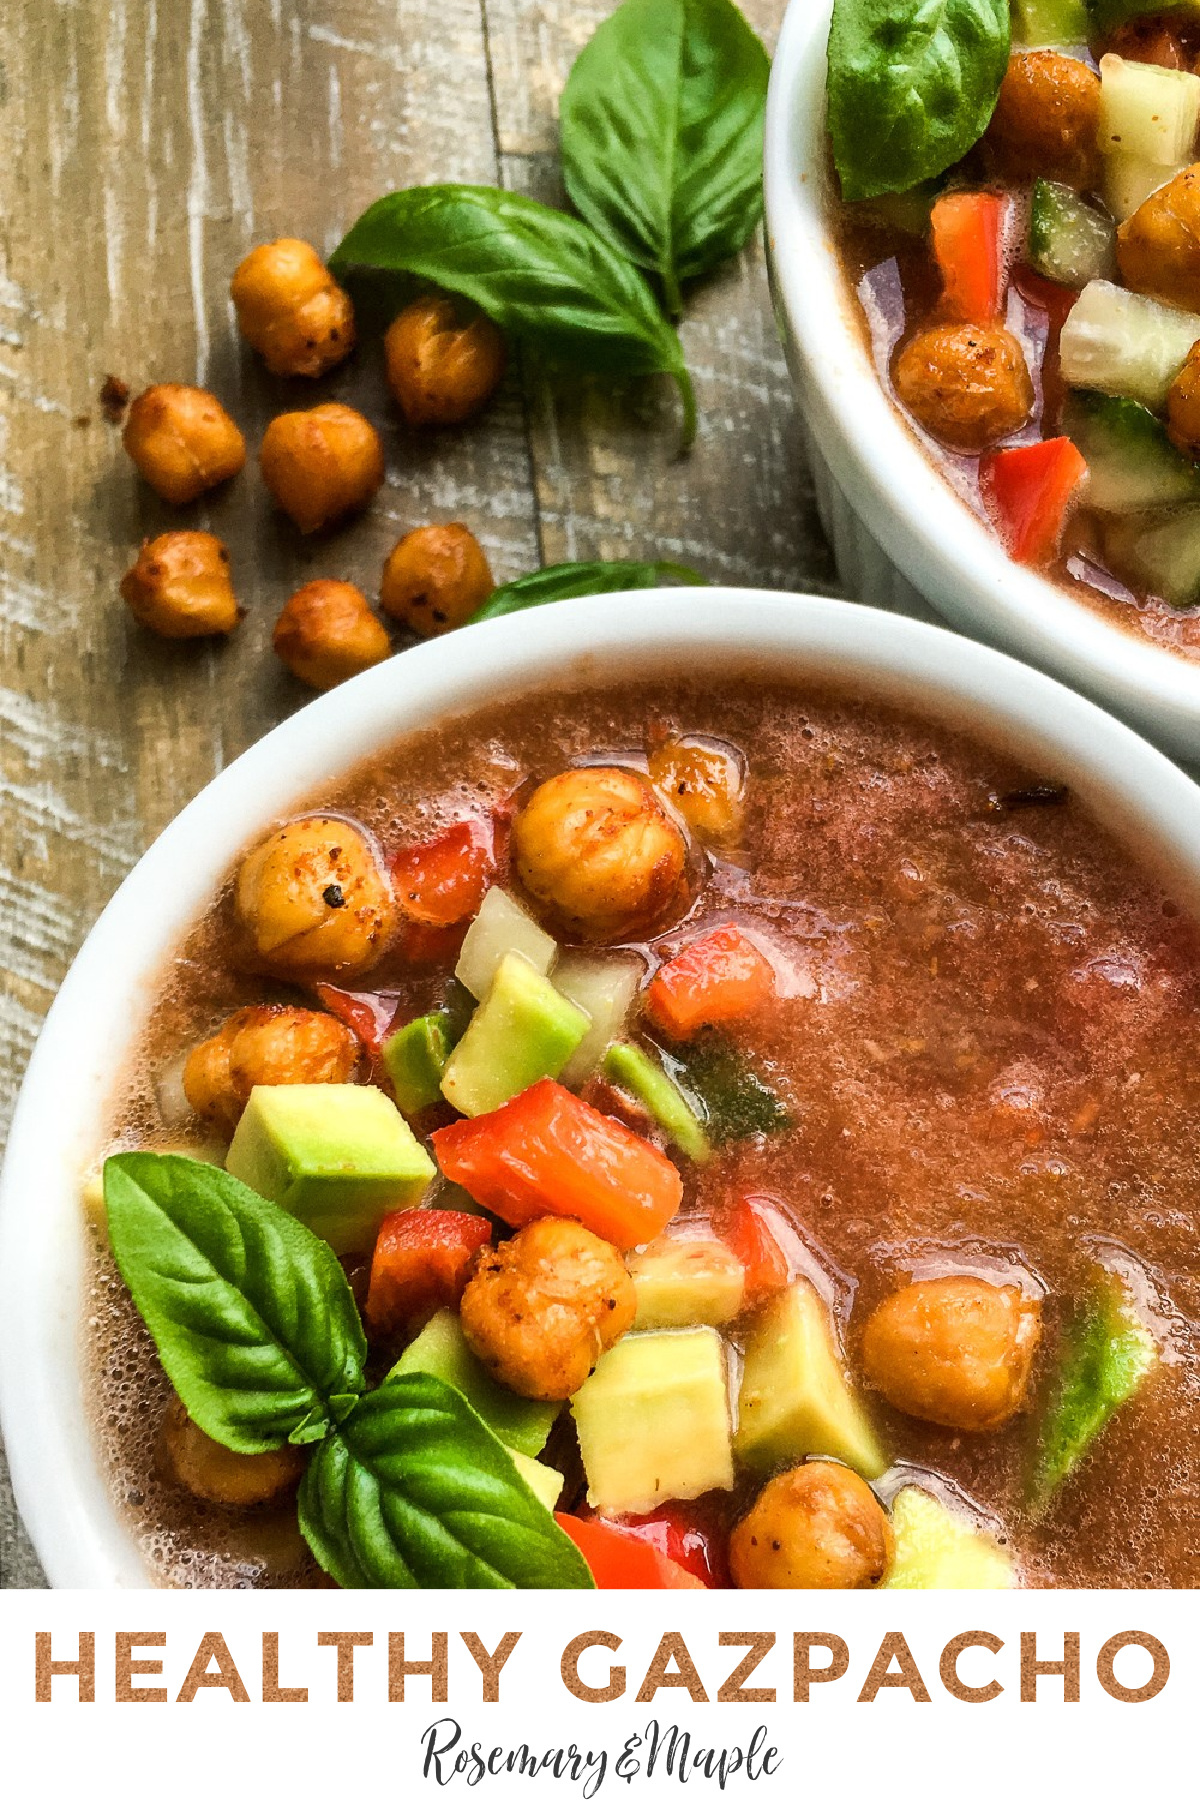 A healthy gazpacho recipe that's naturally gluten free, keto friendly, and vegan. It's perfect for hot summer days!